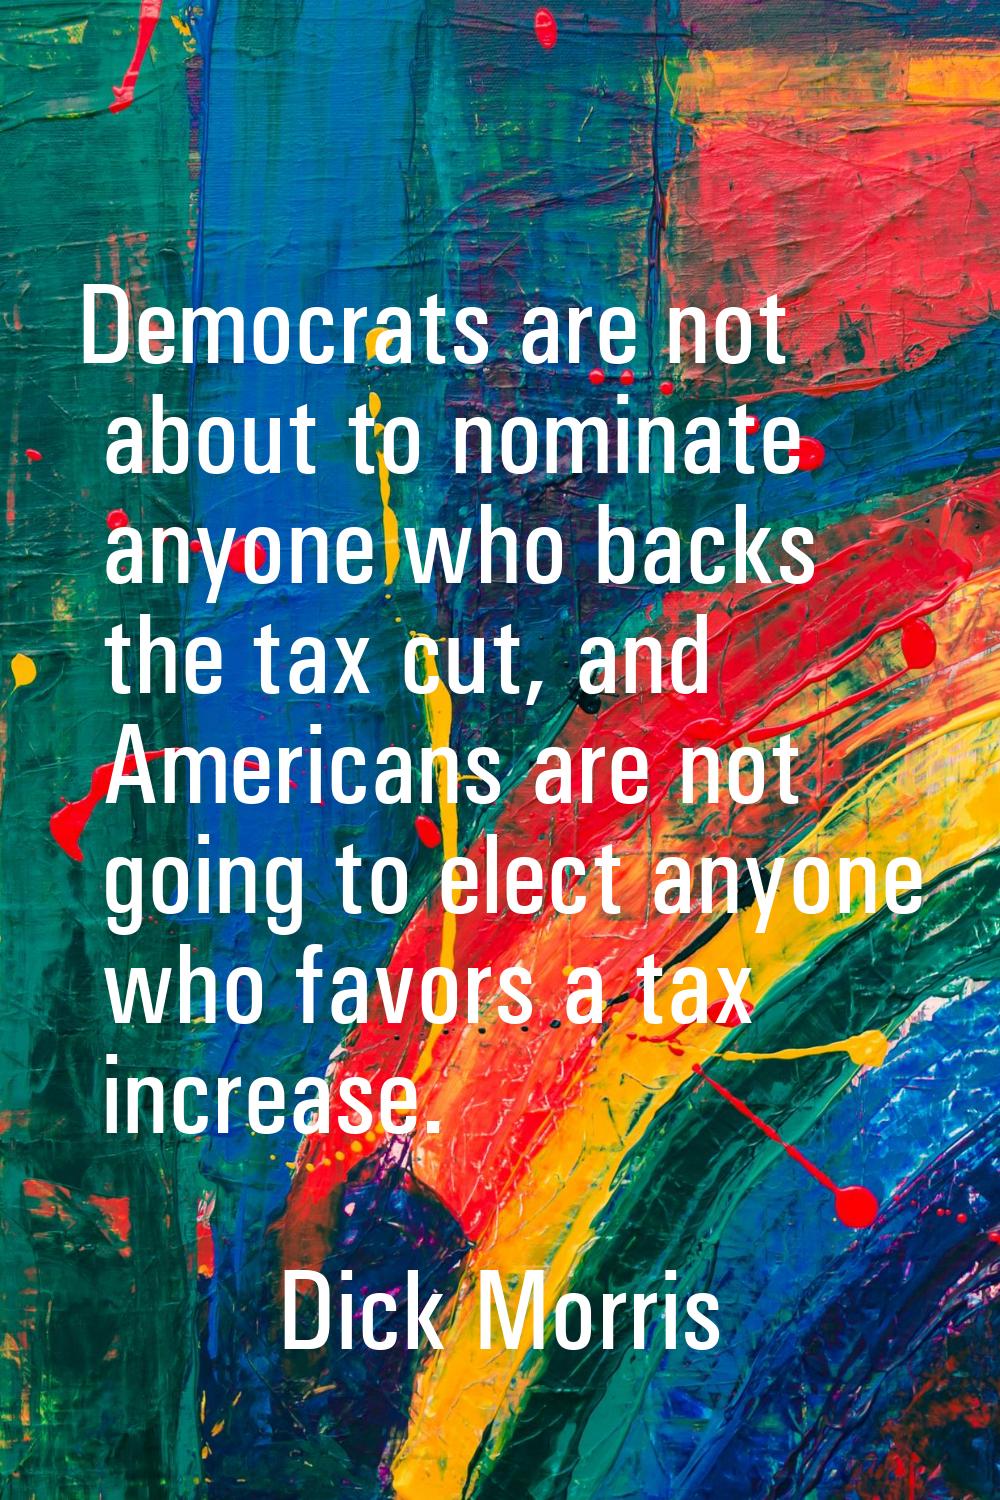 Democrats are not about to nominate anyone who backs the tax cut, and Americans are not going to el